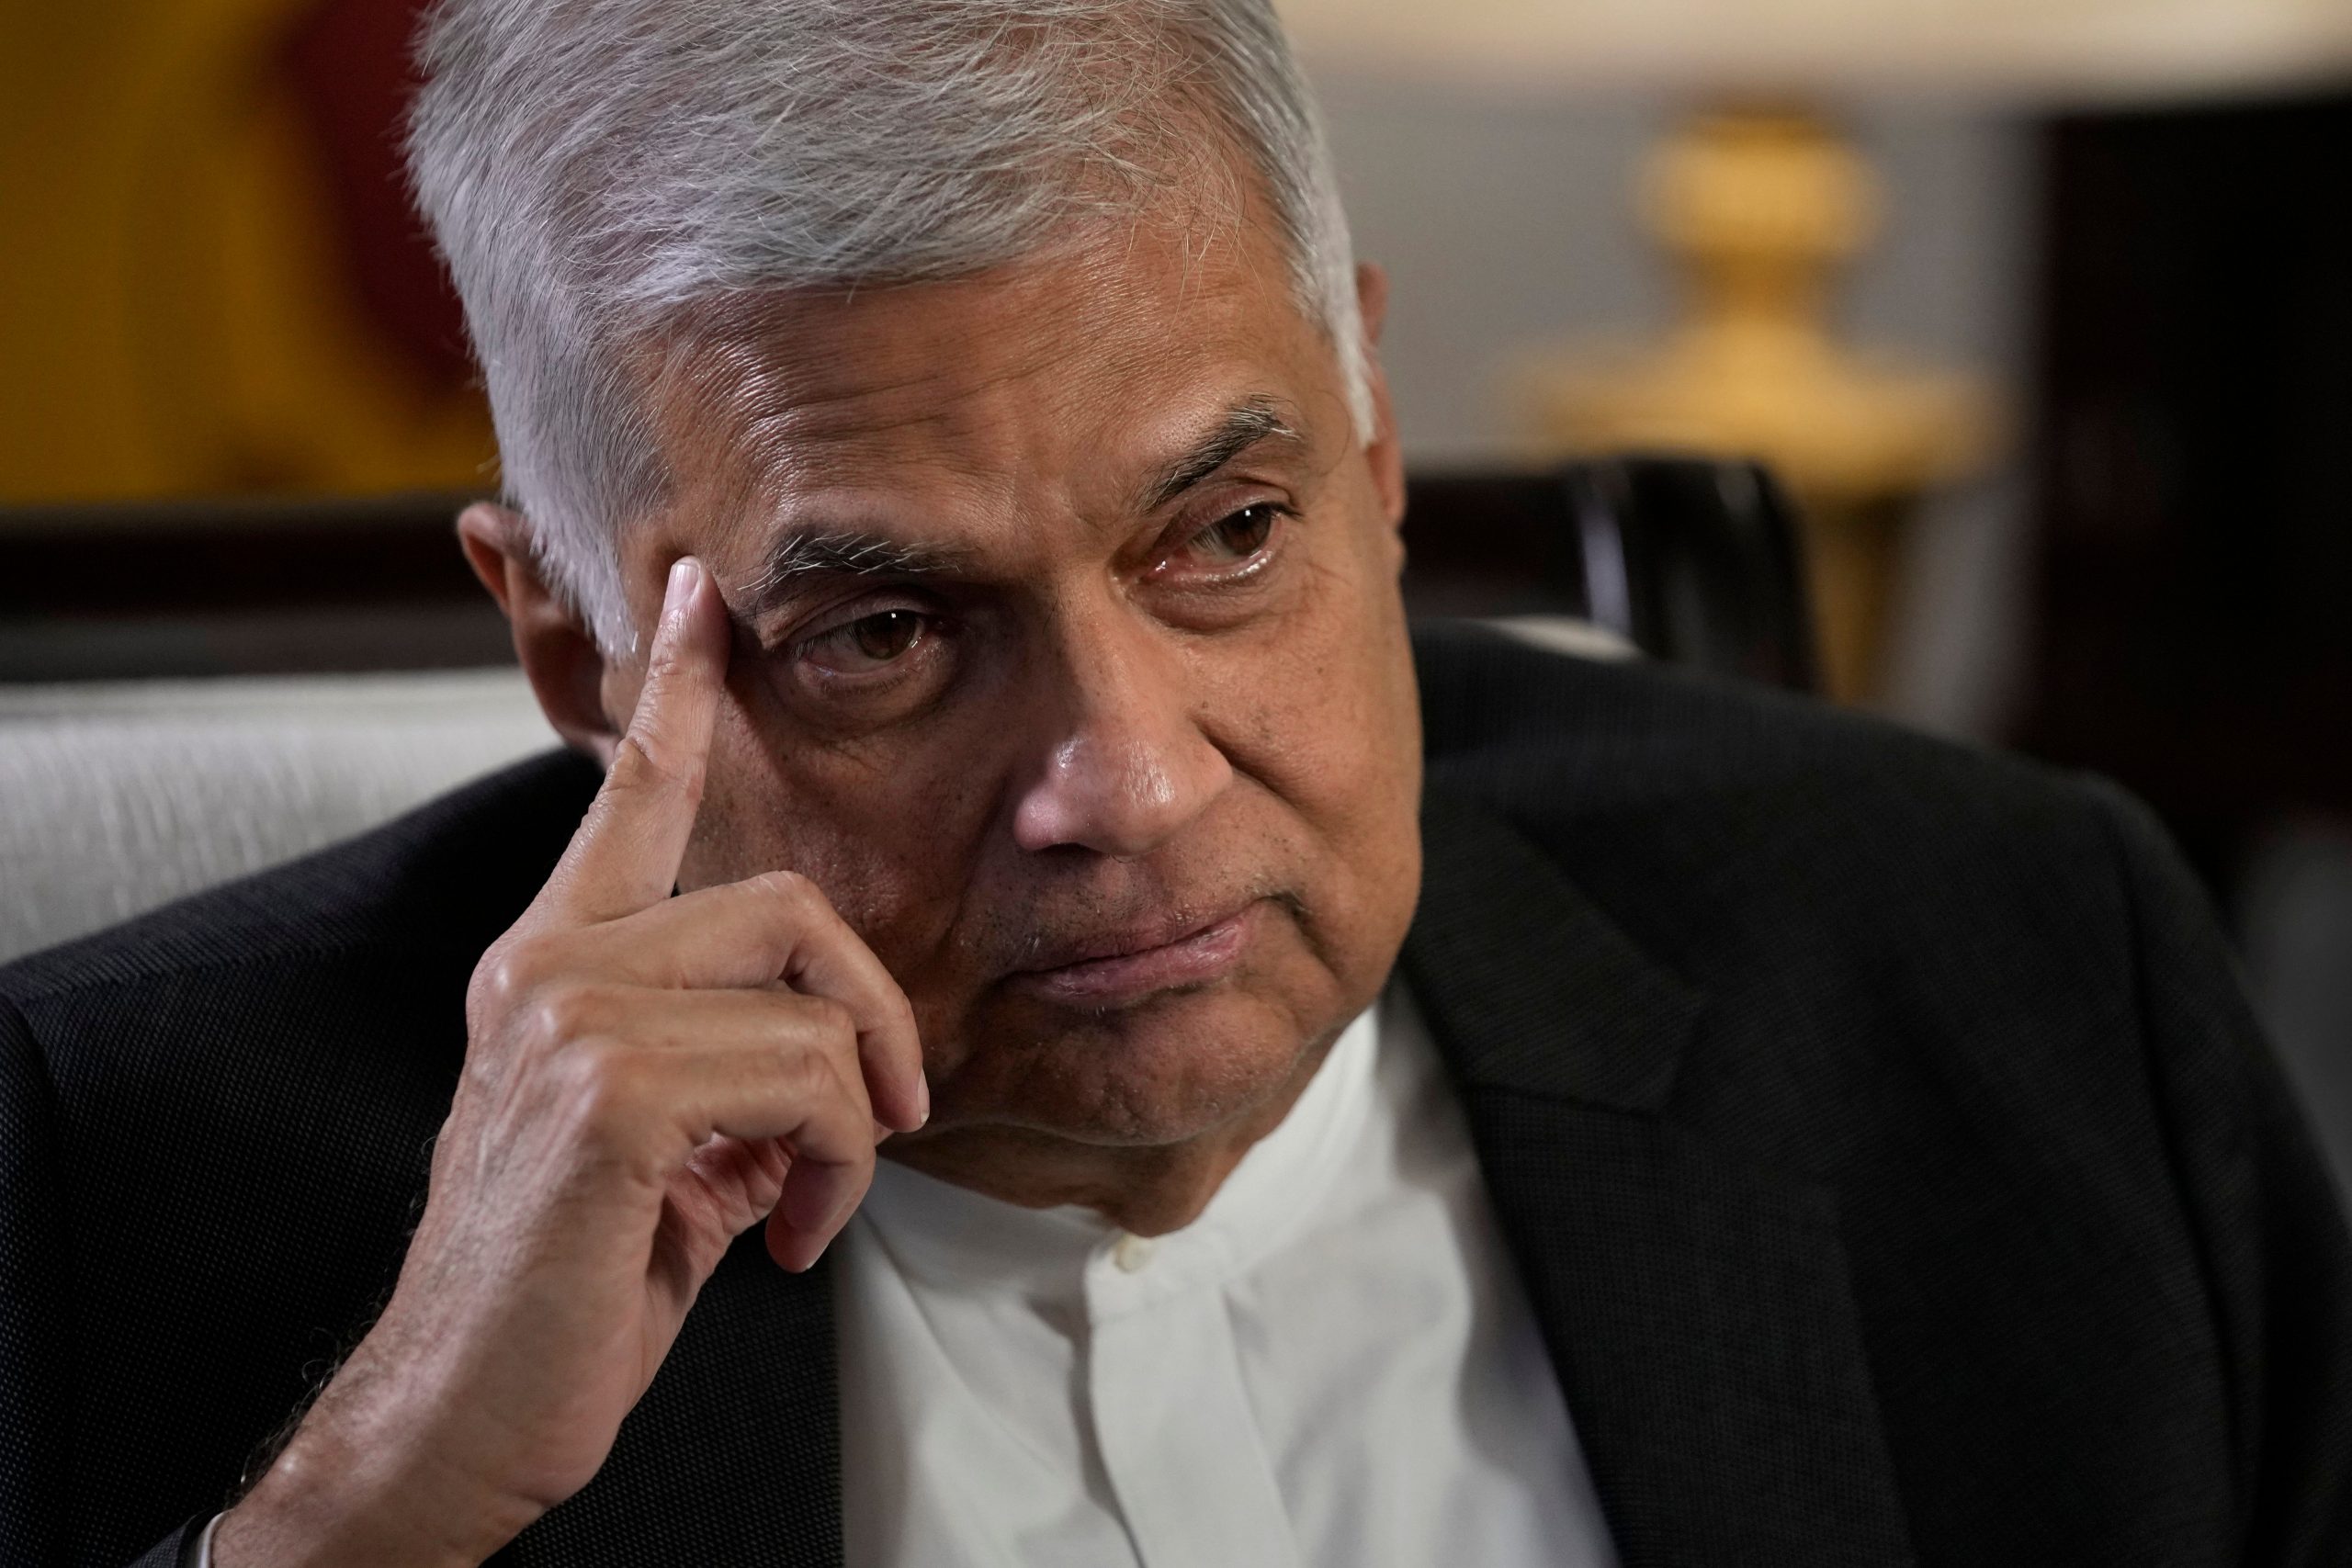 Talks with IMF difficult due to bankruptcy: Sri Lankan PM Ranil Wickremesinghe